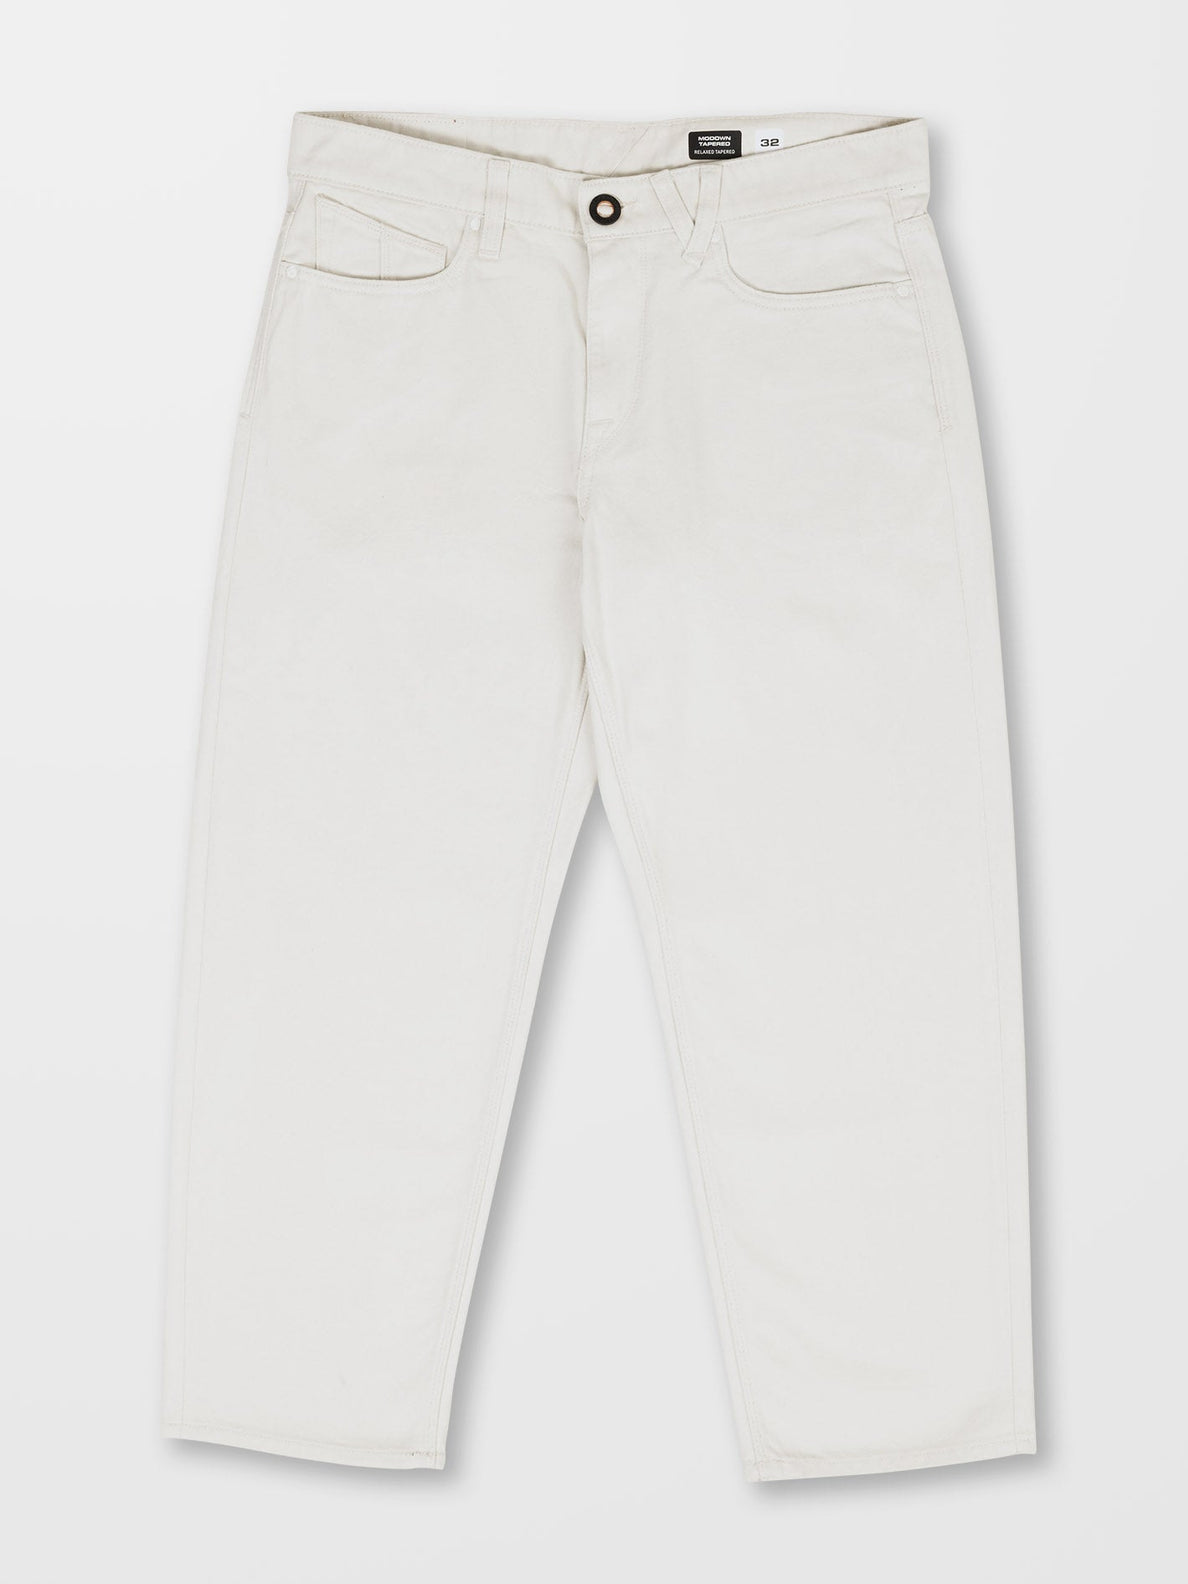 Modown Tapered Jeans - WHITECAP GREY (A1932102_WCG) [1]